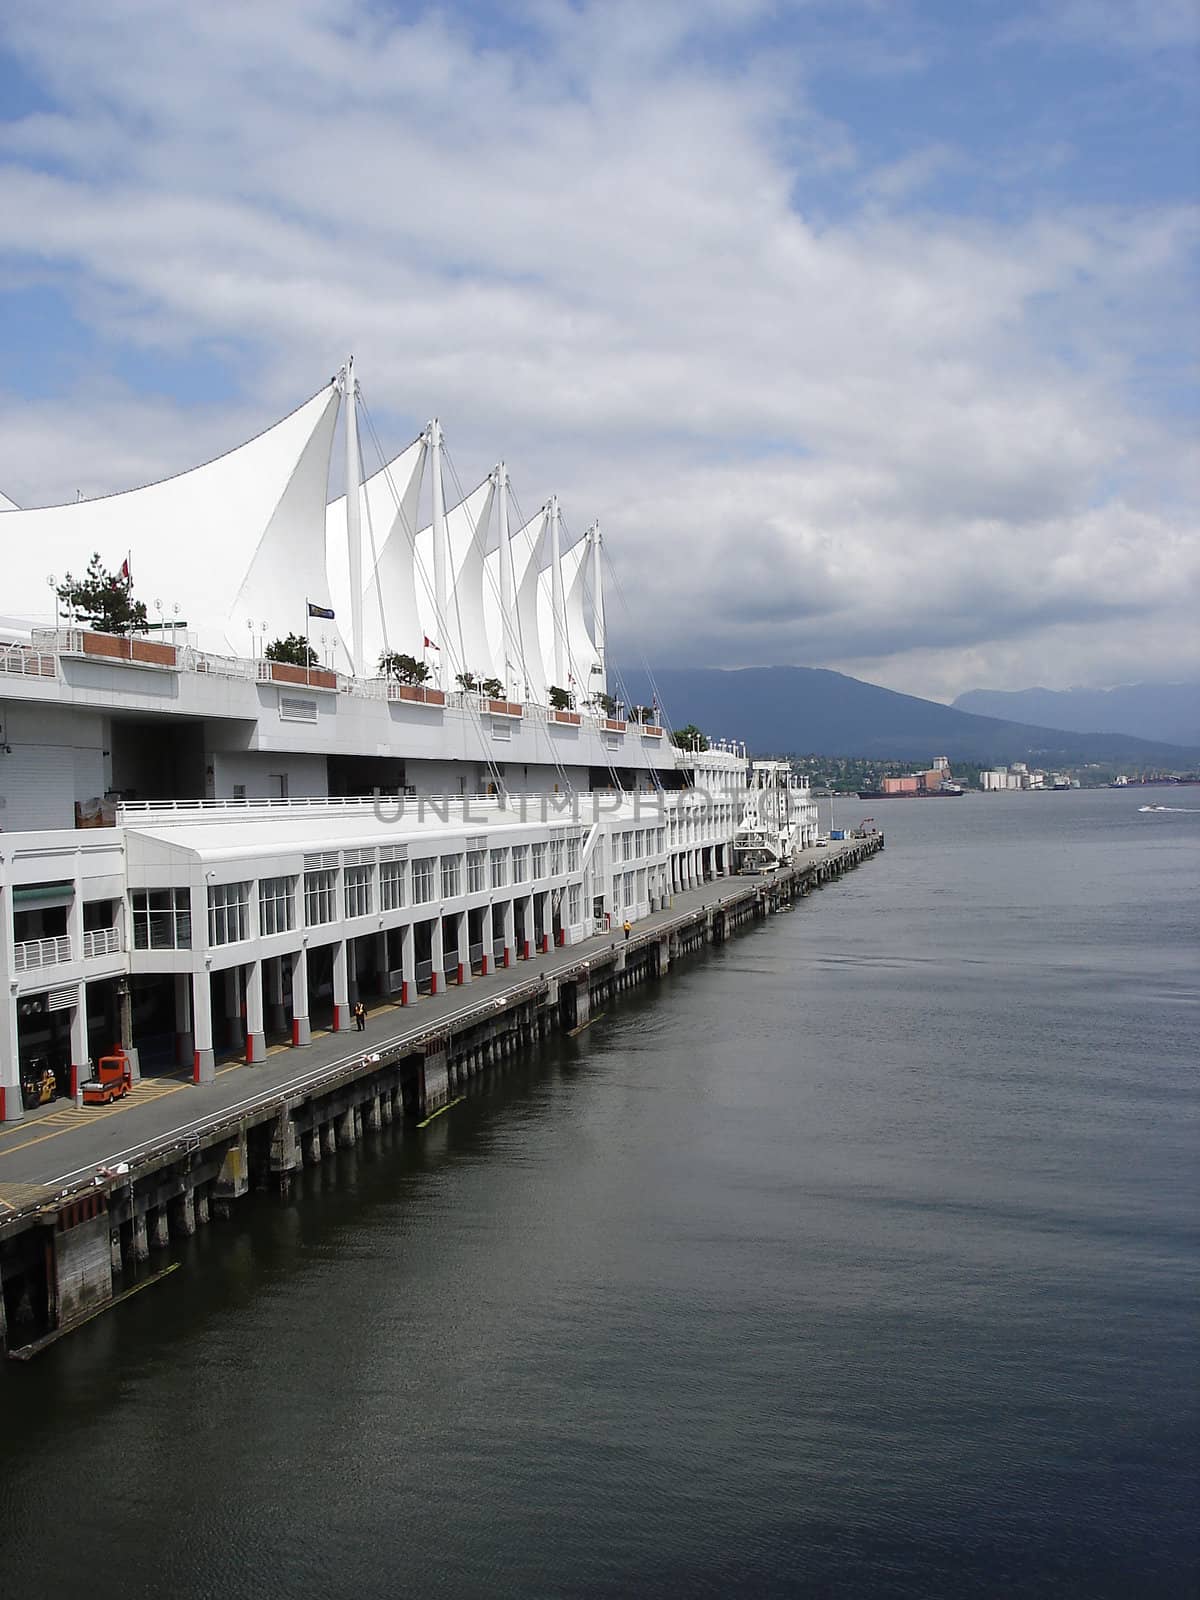 Five Sails Canada Place by mmgphoto